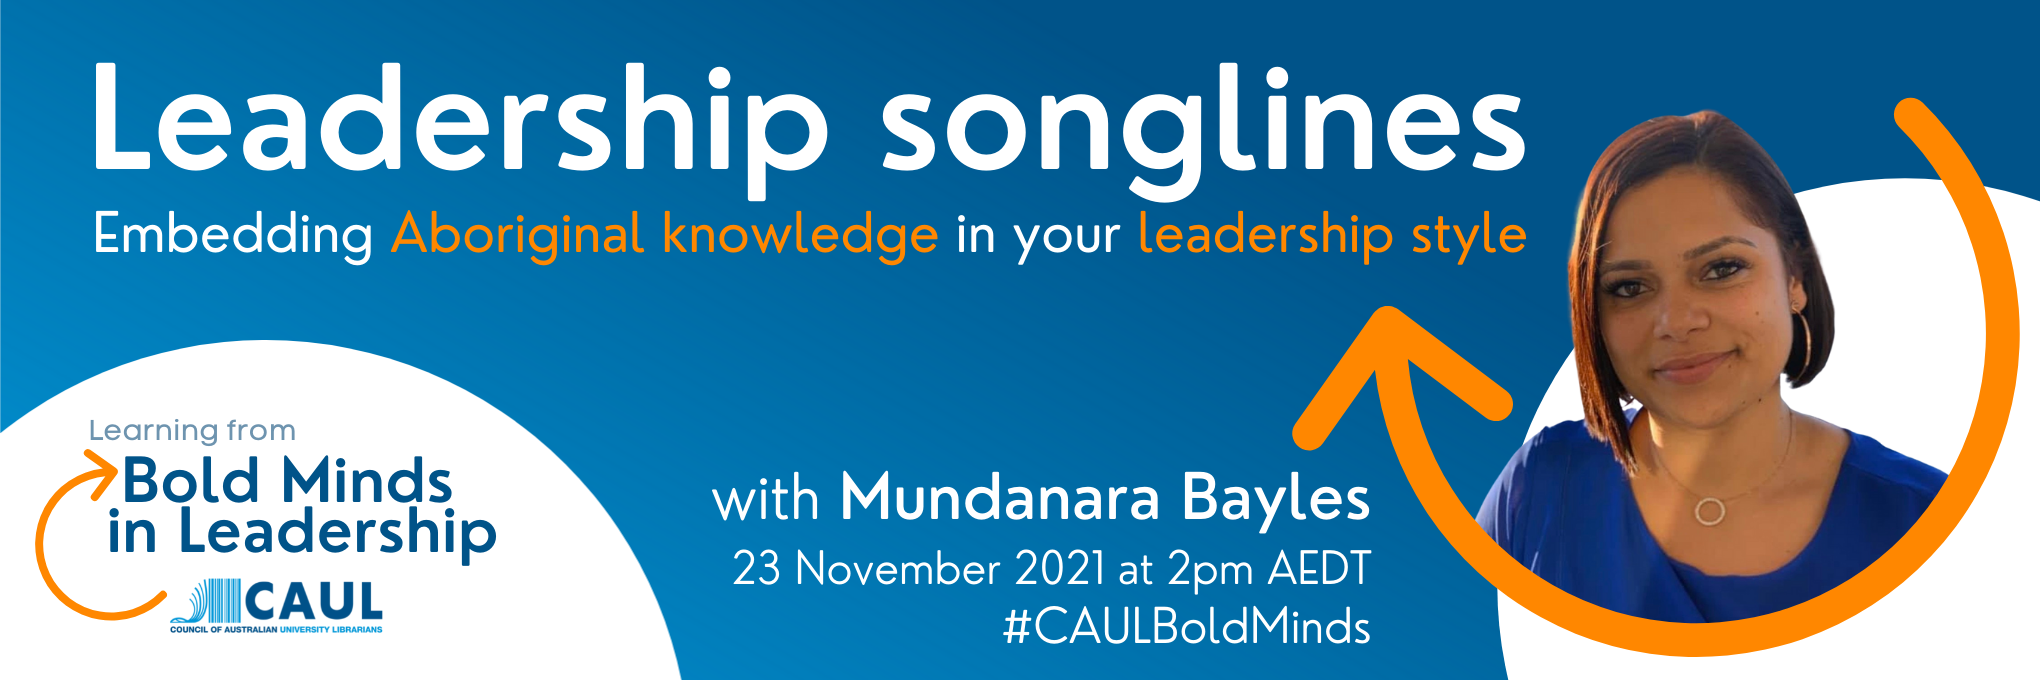 Leadership Songlines: embedding Aboriginal Knowledge in your leadership style. With Mundanara Bayles. 23 November 2021 at 2pm AEDT